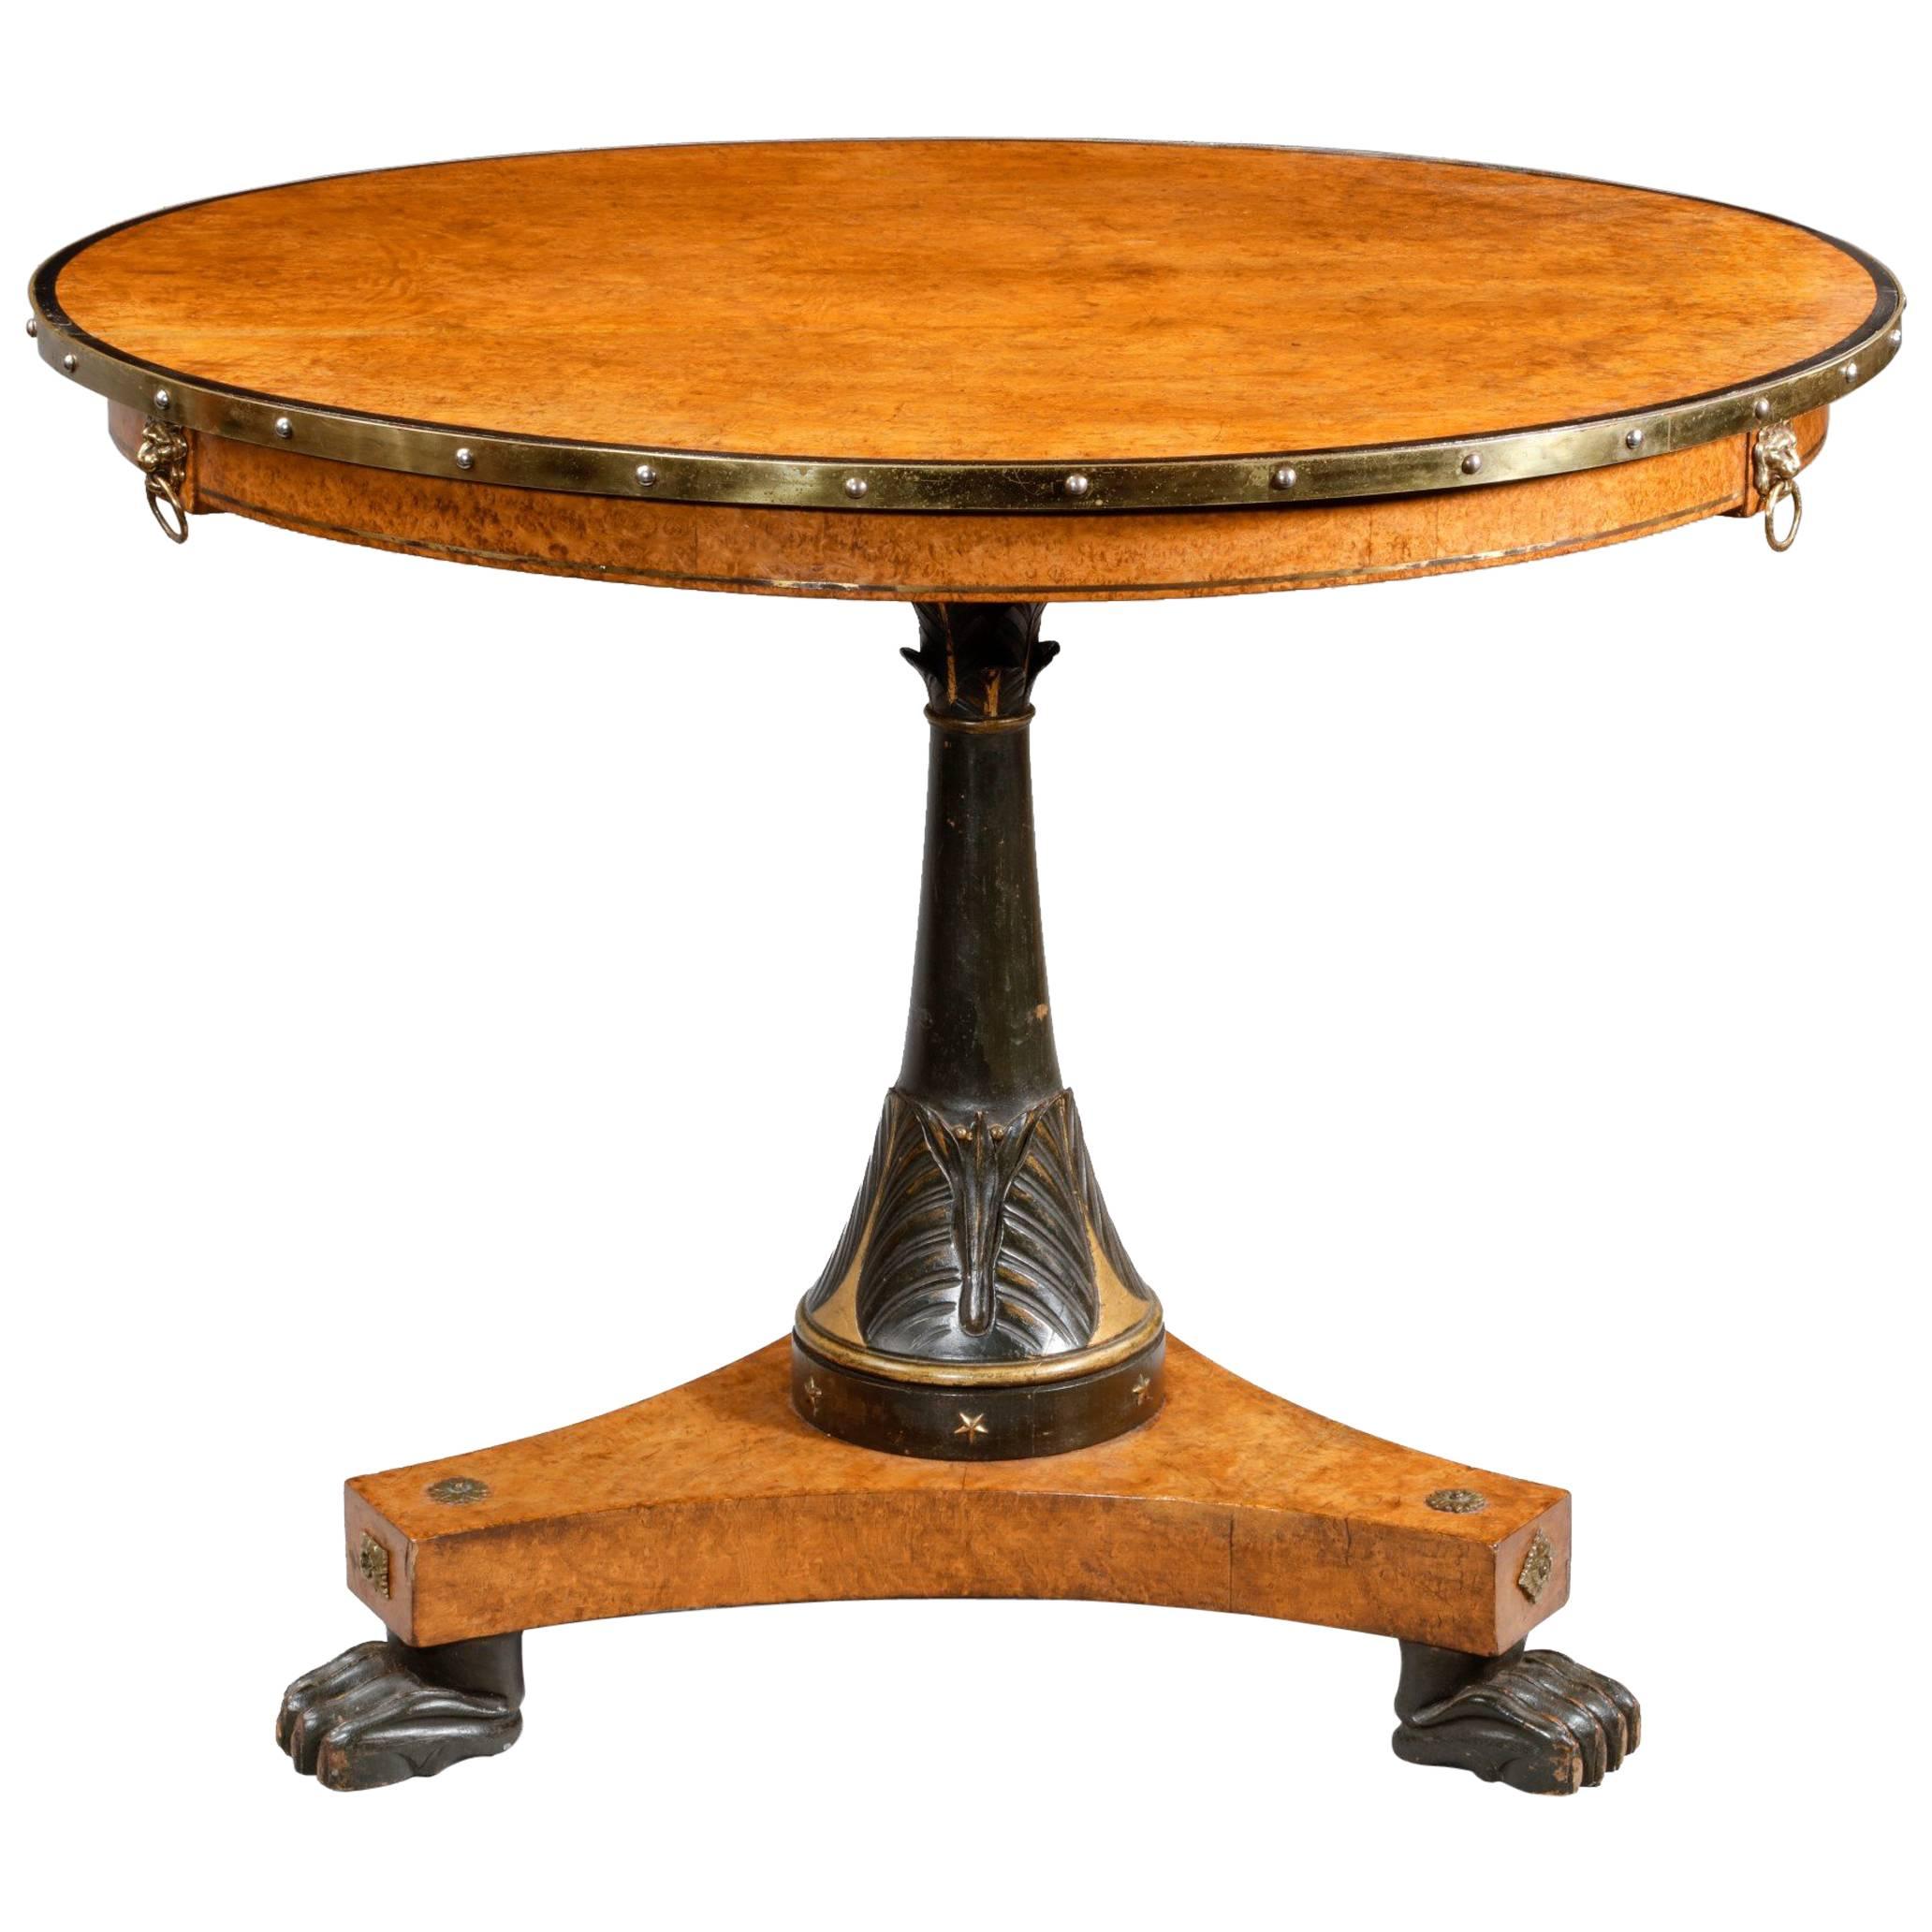 Early 19th Century Burr Amboyna Centre or Occasional Table, Possibly Russian